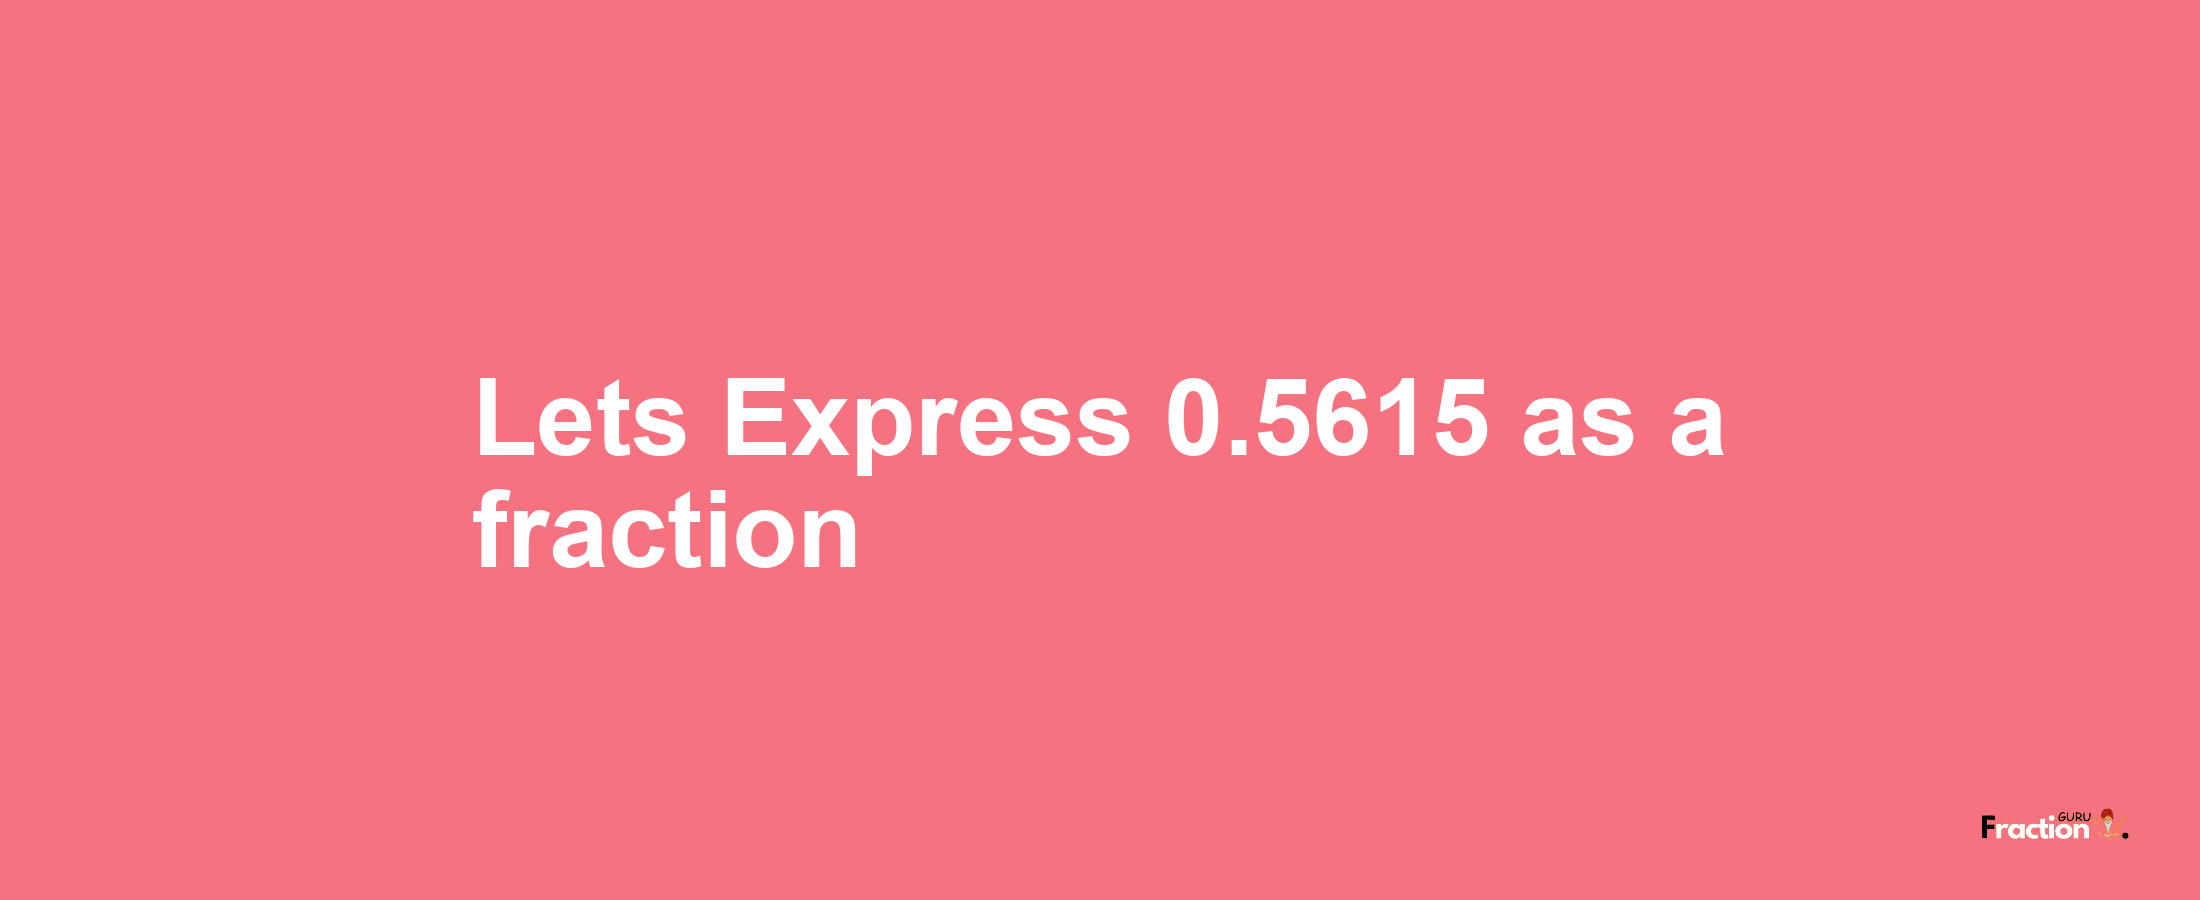 Lets Express 0.5615 as afraction